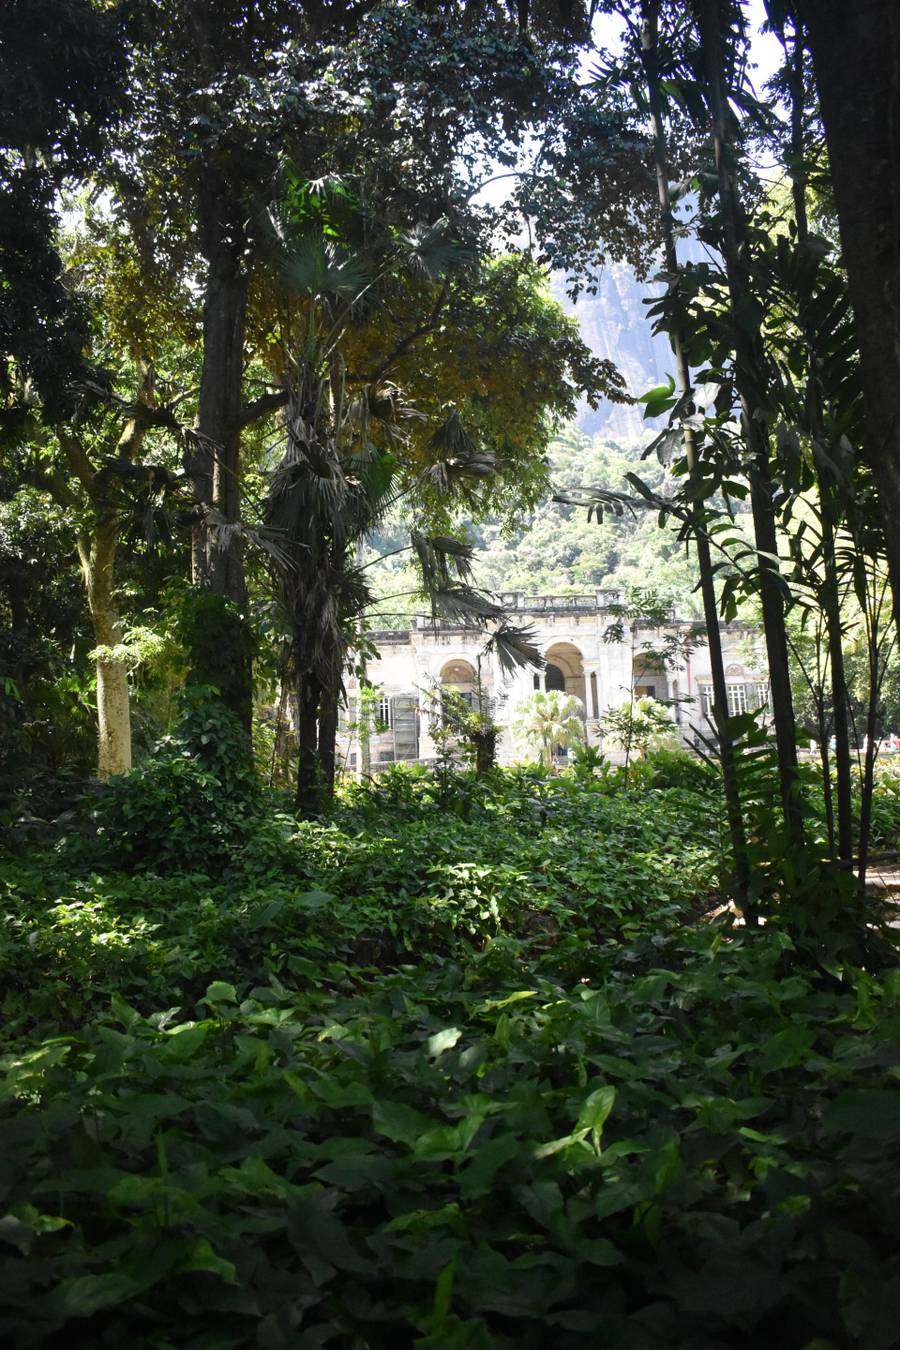 Palacete hidden in the trees